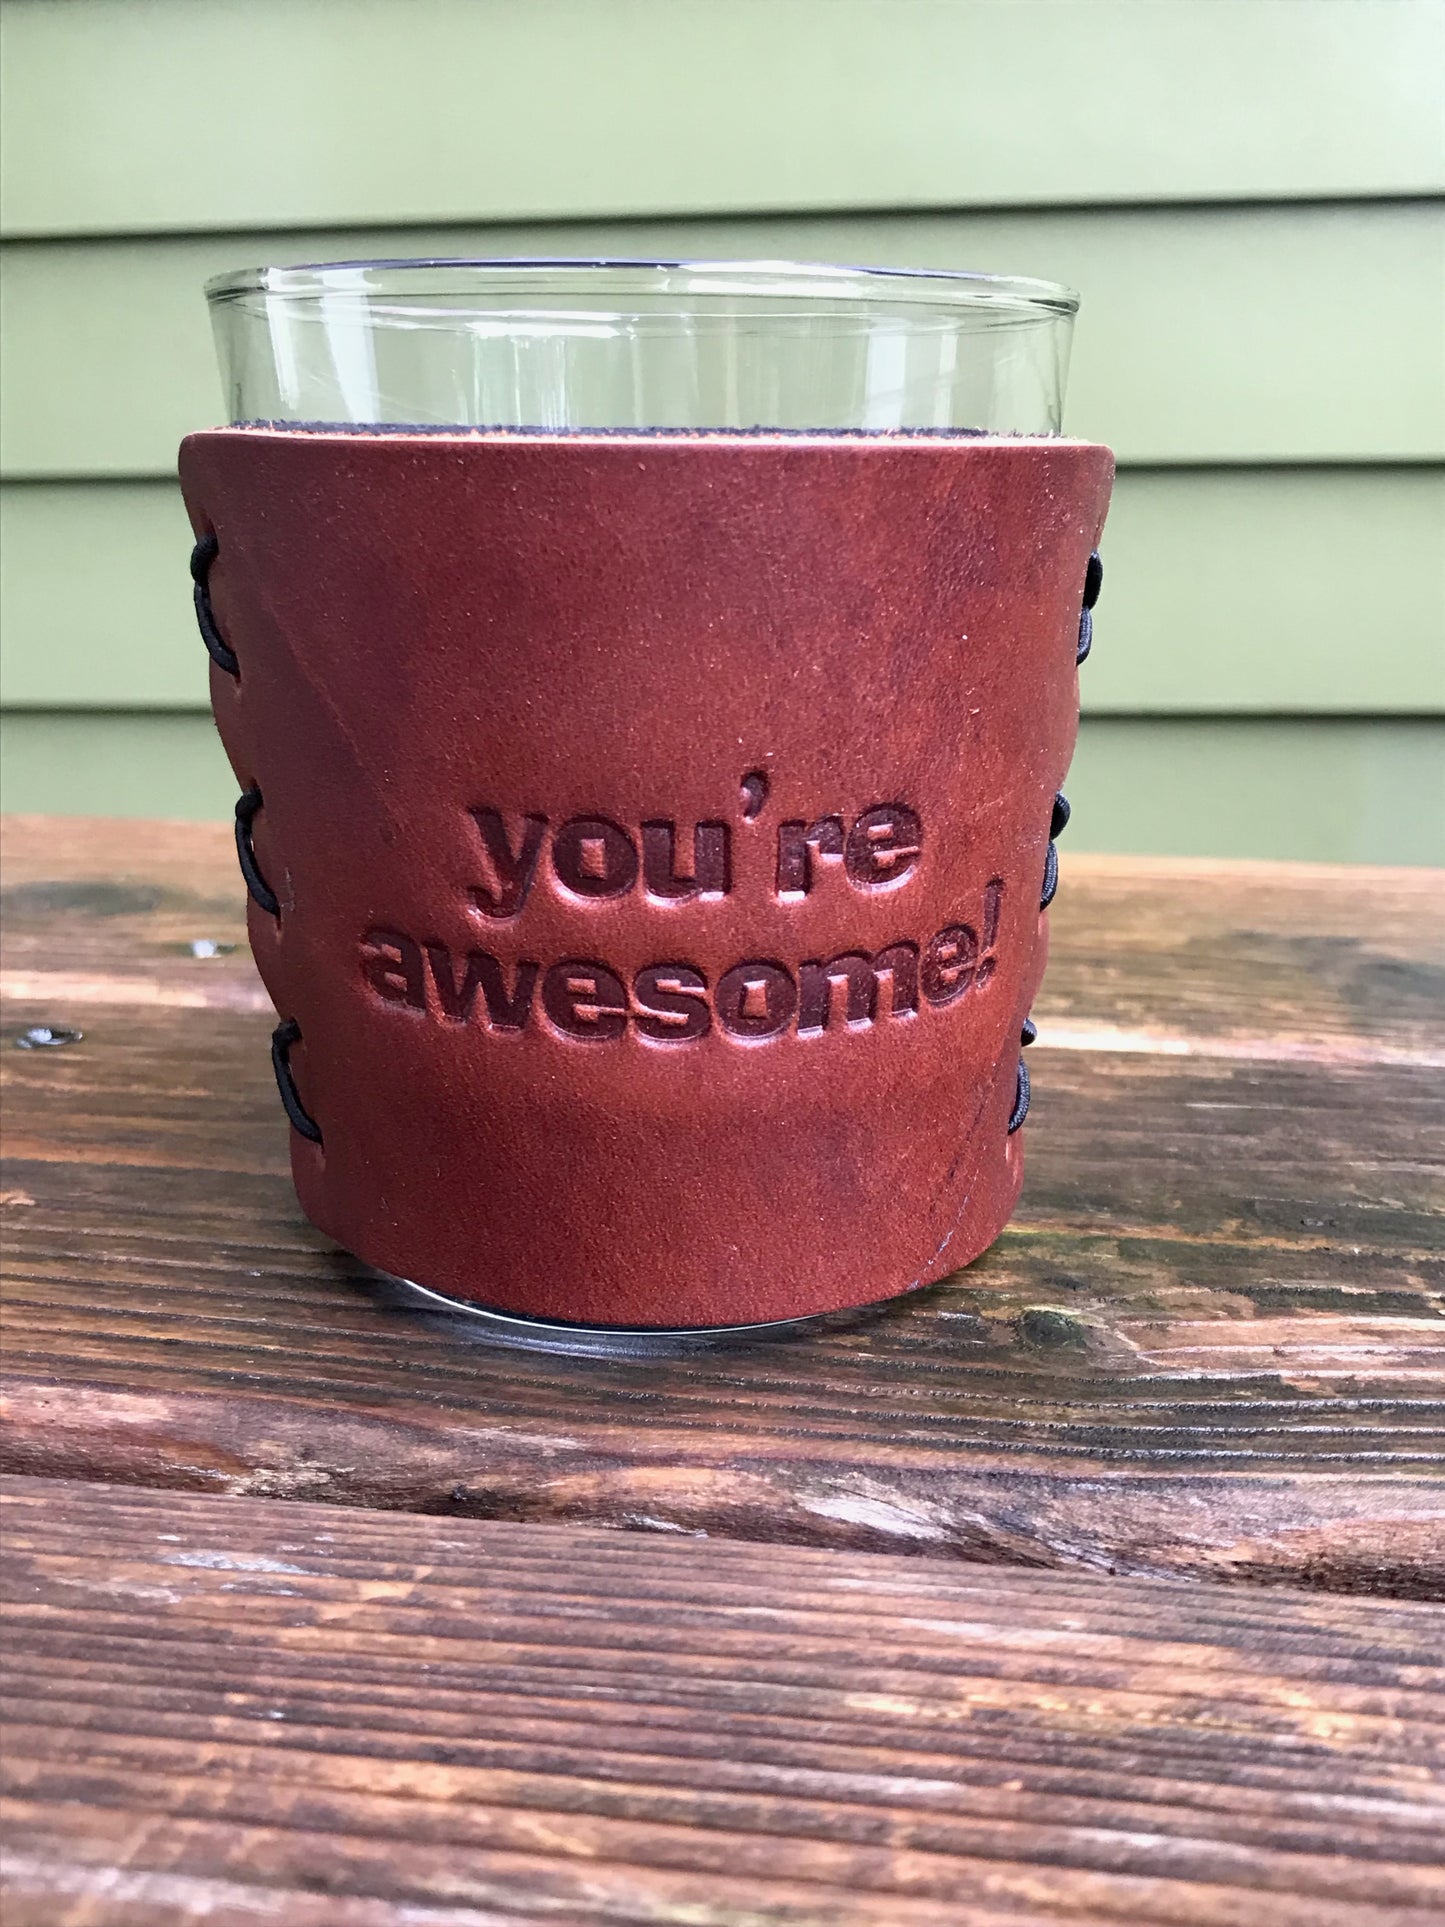 Leather Wrapped Whiskey Glass - You're Awesome